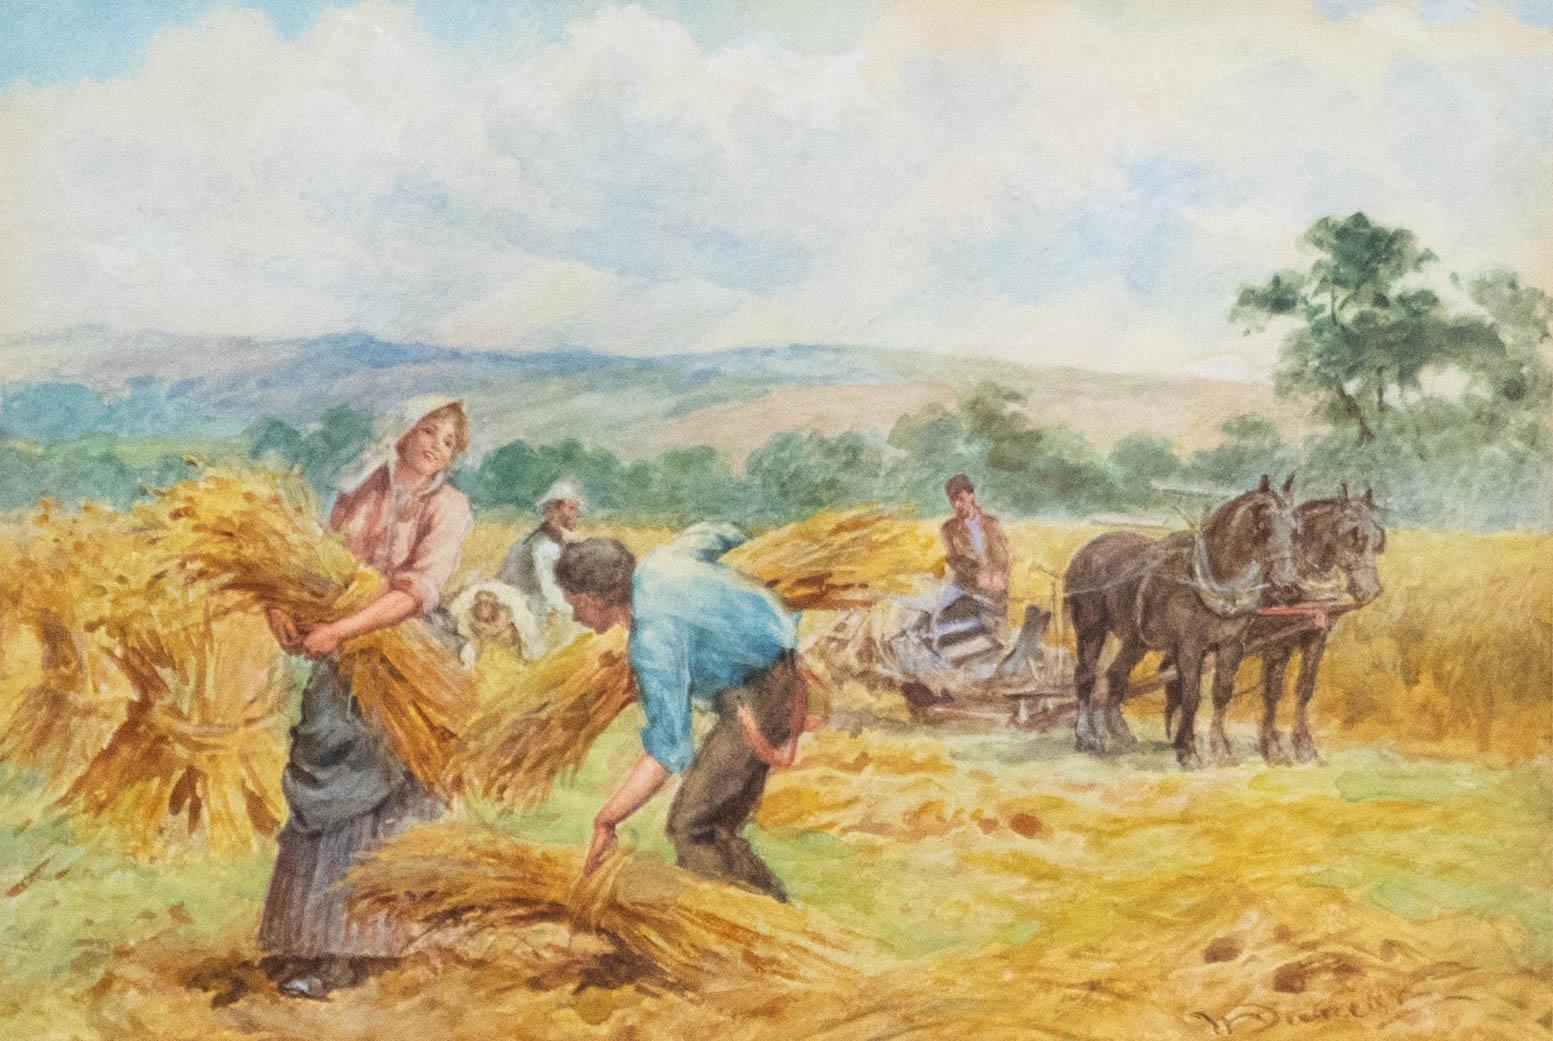 Walter Duncan (1848-1932) - Early 20th Century Watercolour, A Joyful Harvest - Art by Unknown